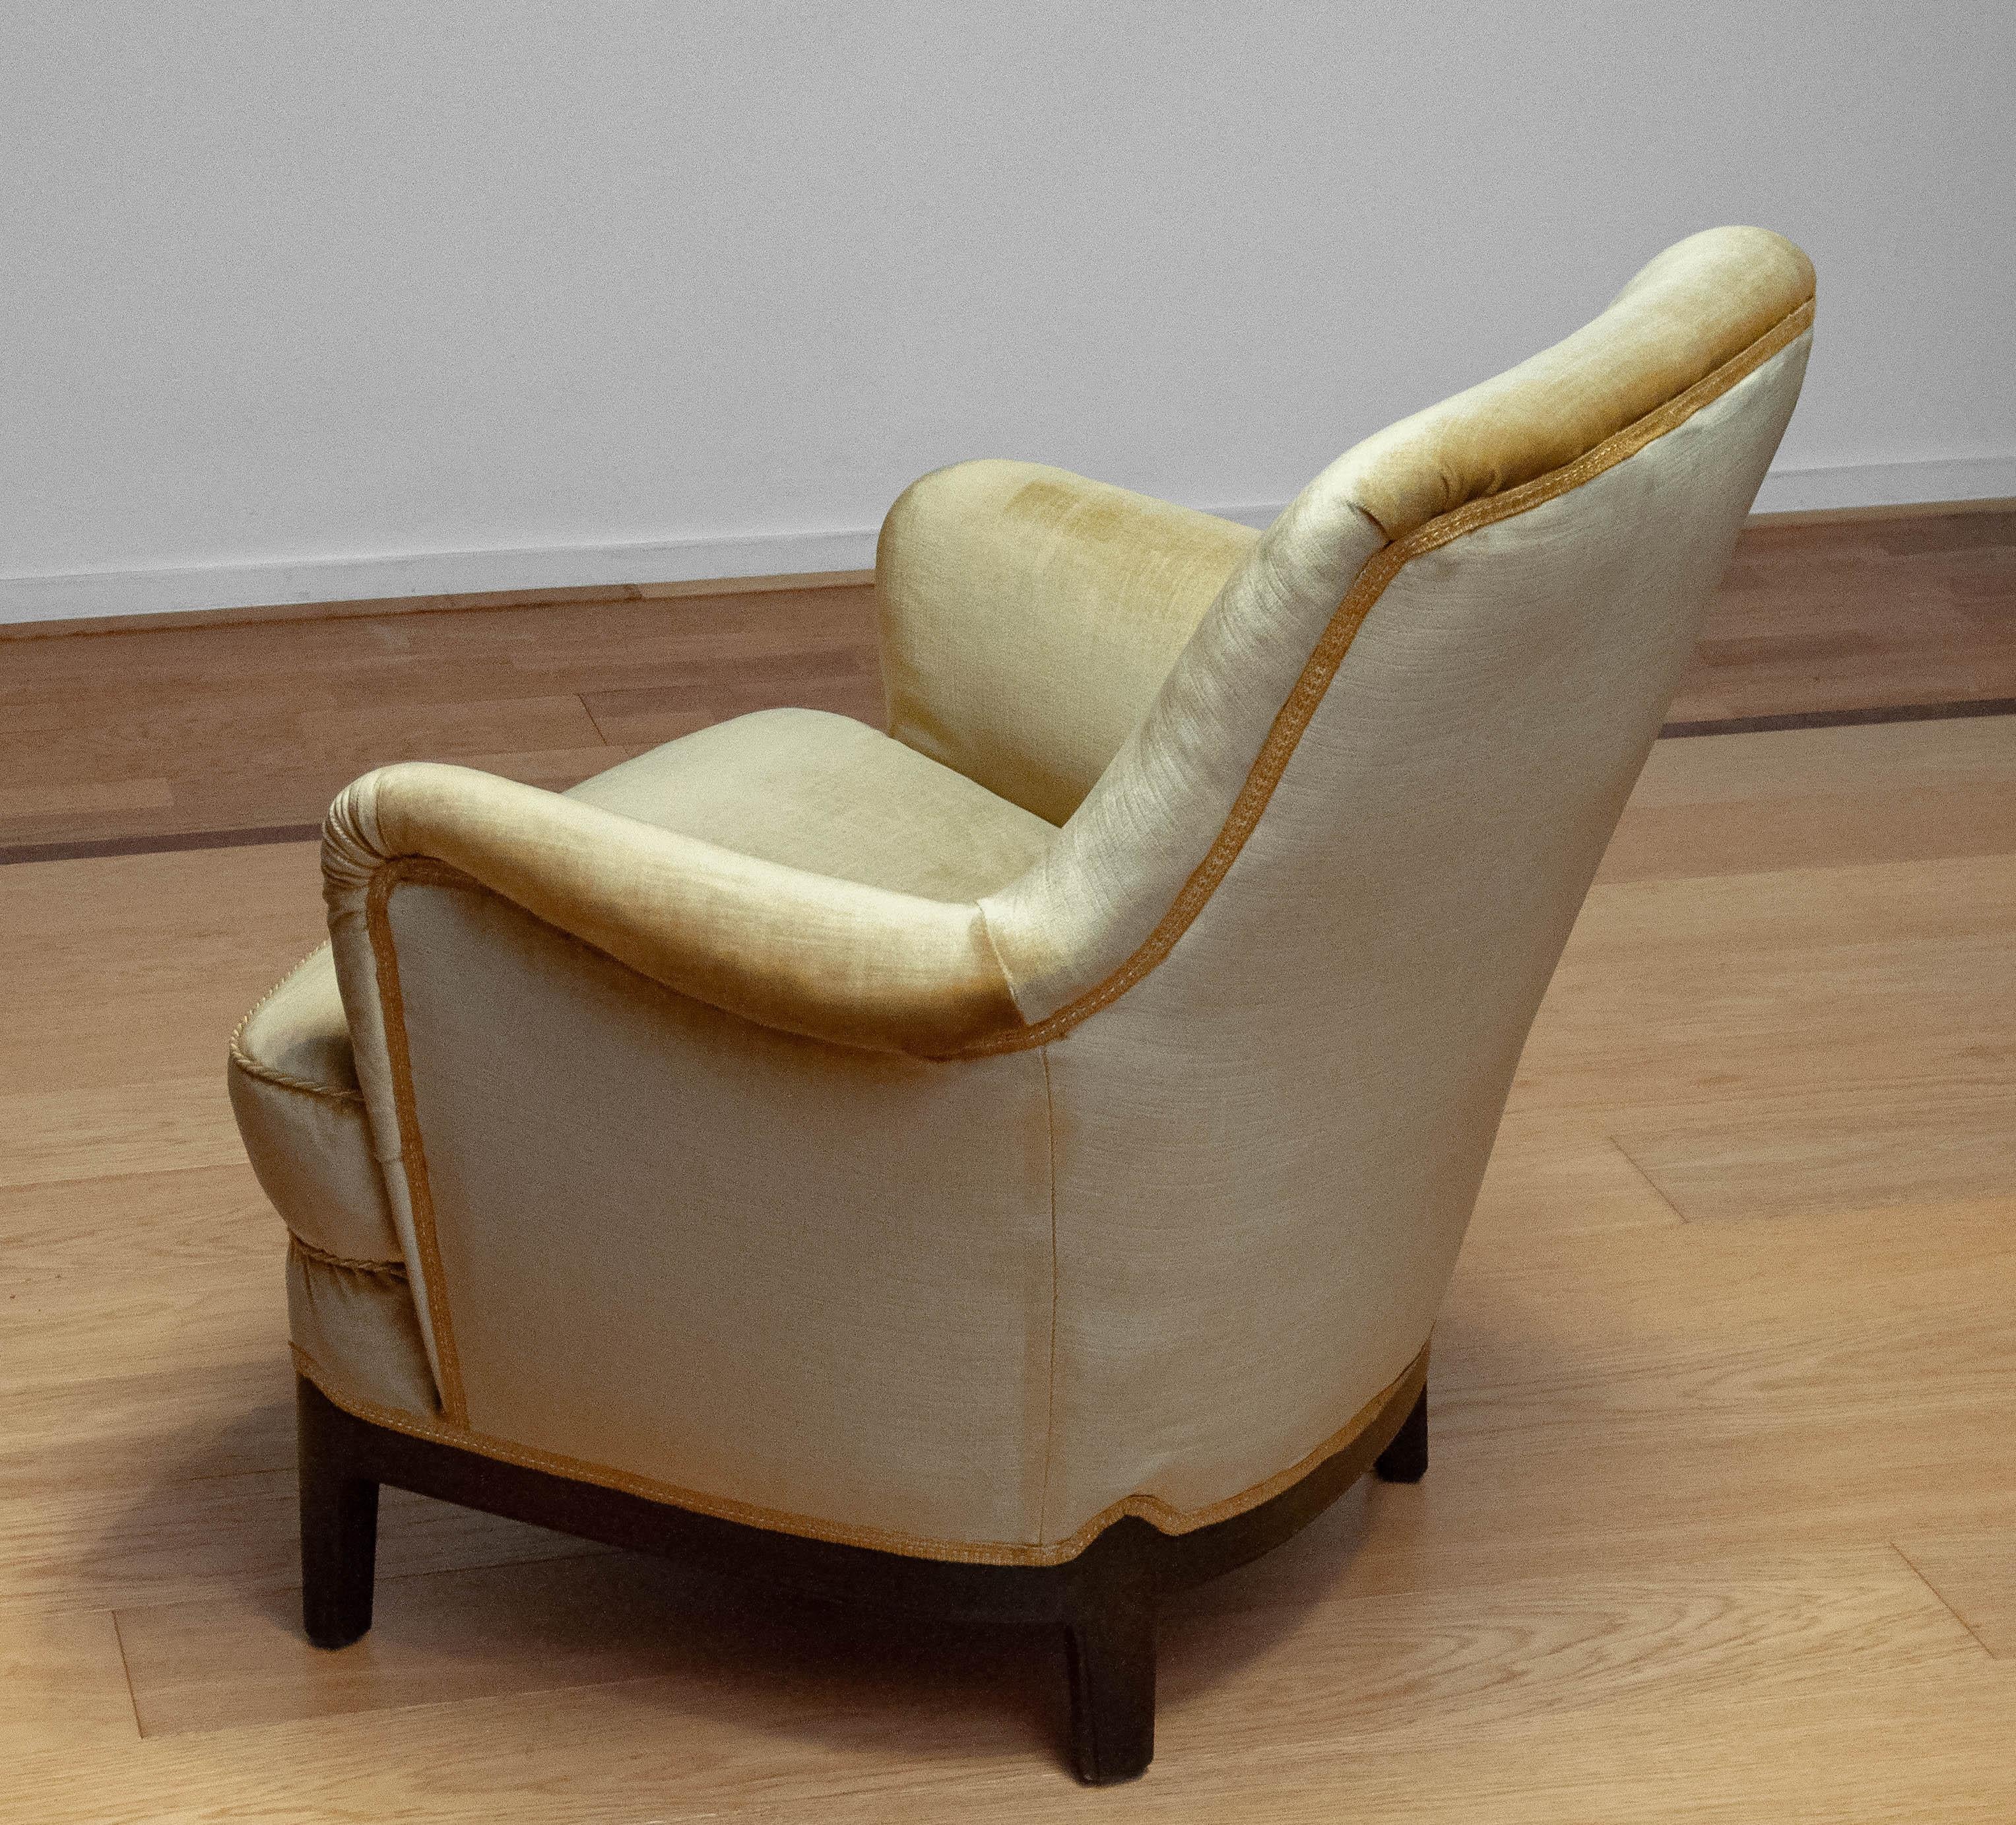 1940s Gold Colored Velvet Upholstered Lounge Chair By Carl Malmsten Sweden In Good Condition For Sale In Silvolde, Gelderland